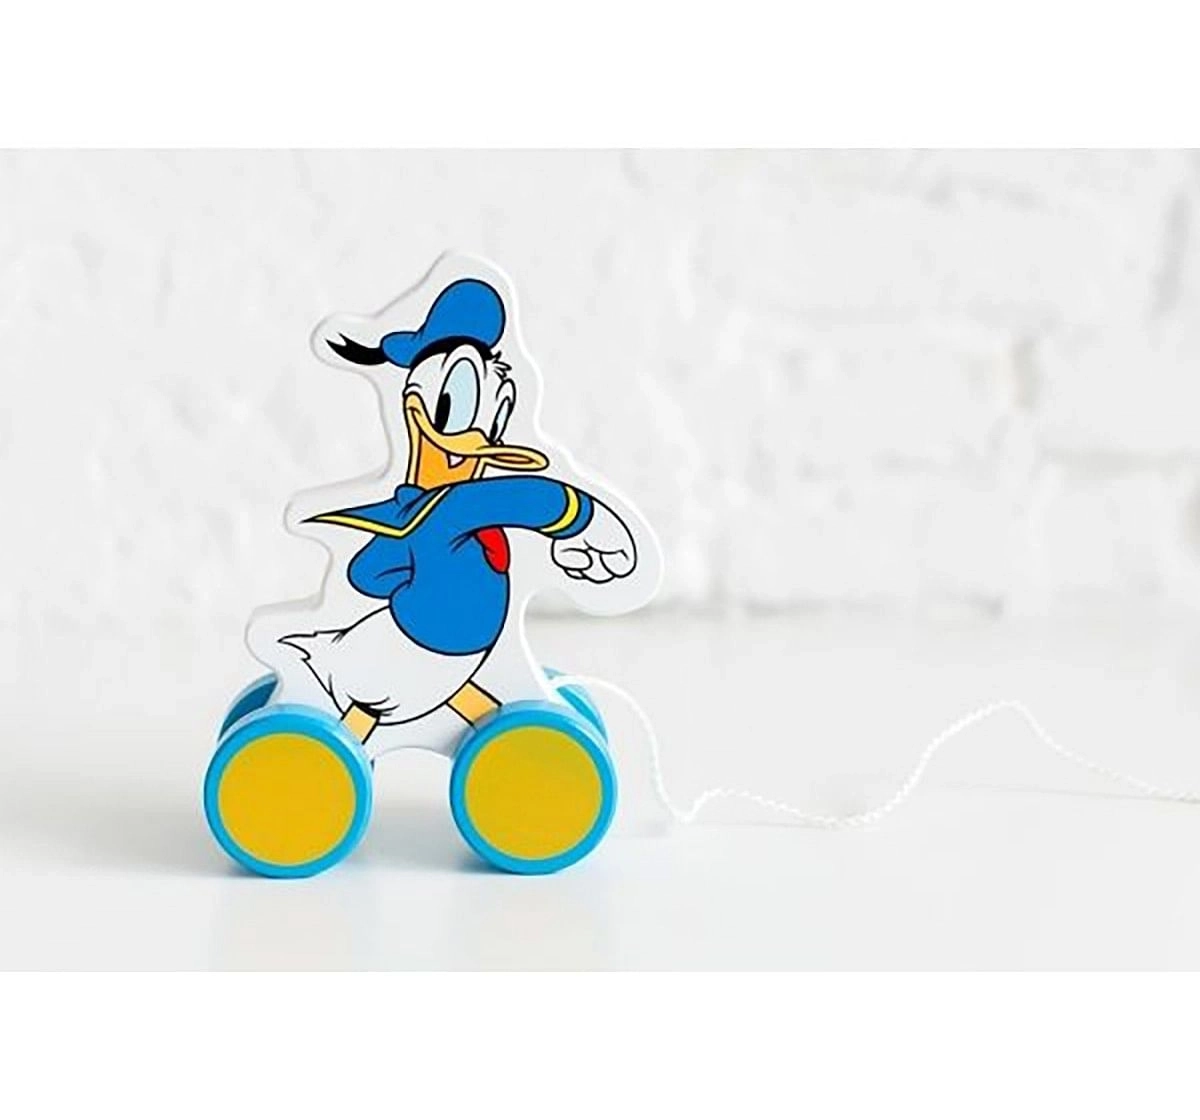 Disney Donald Pull Along Wooden Toy for Kids age 1Y+ 